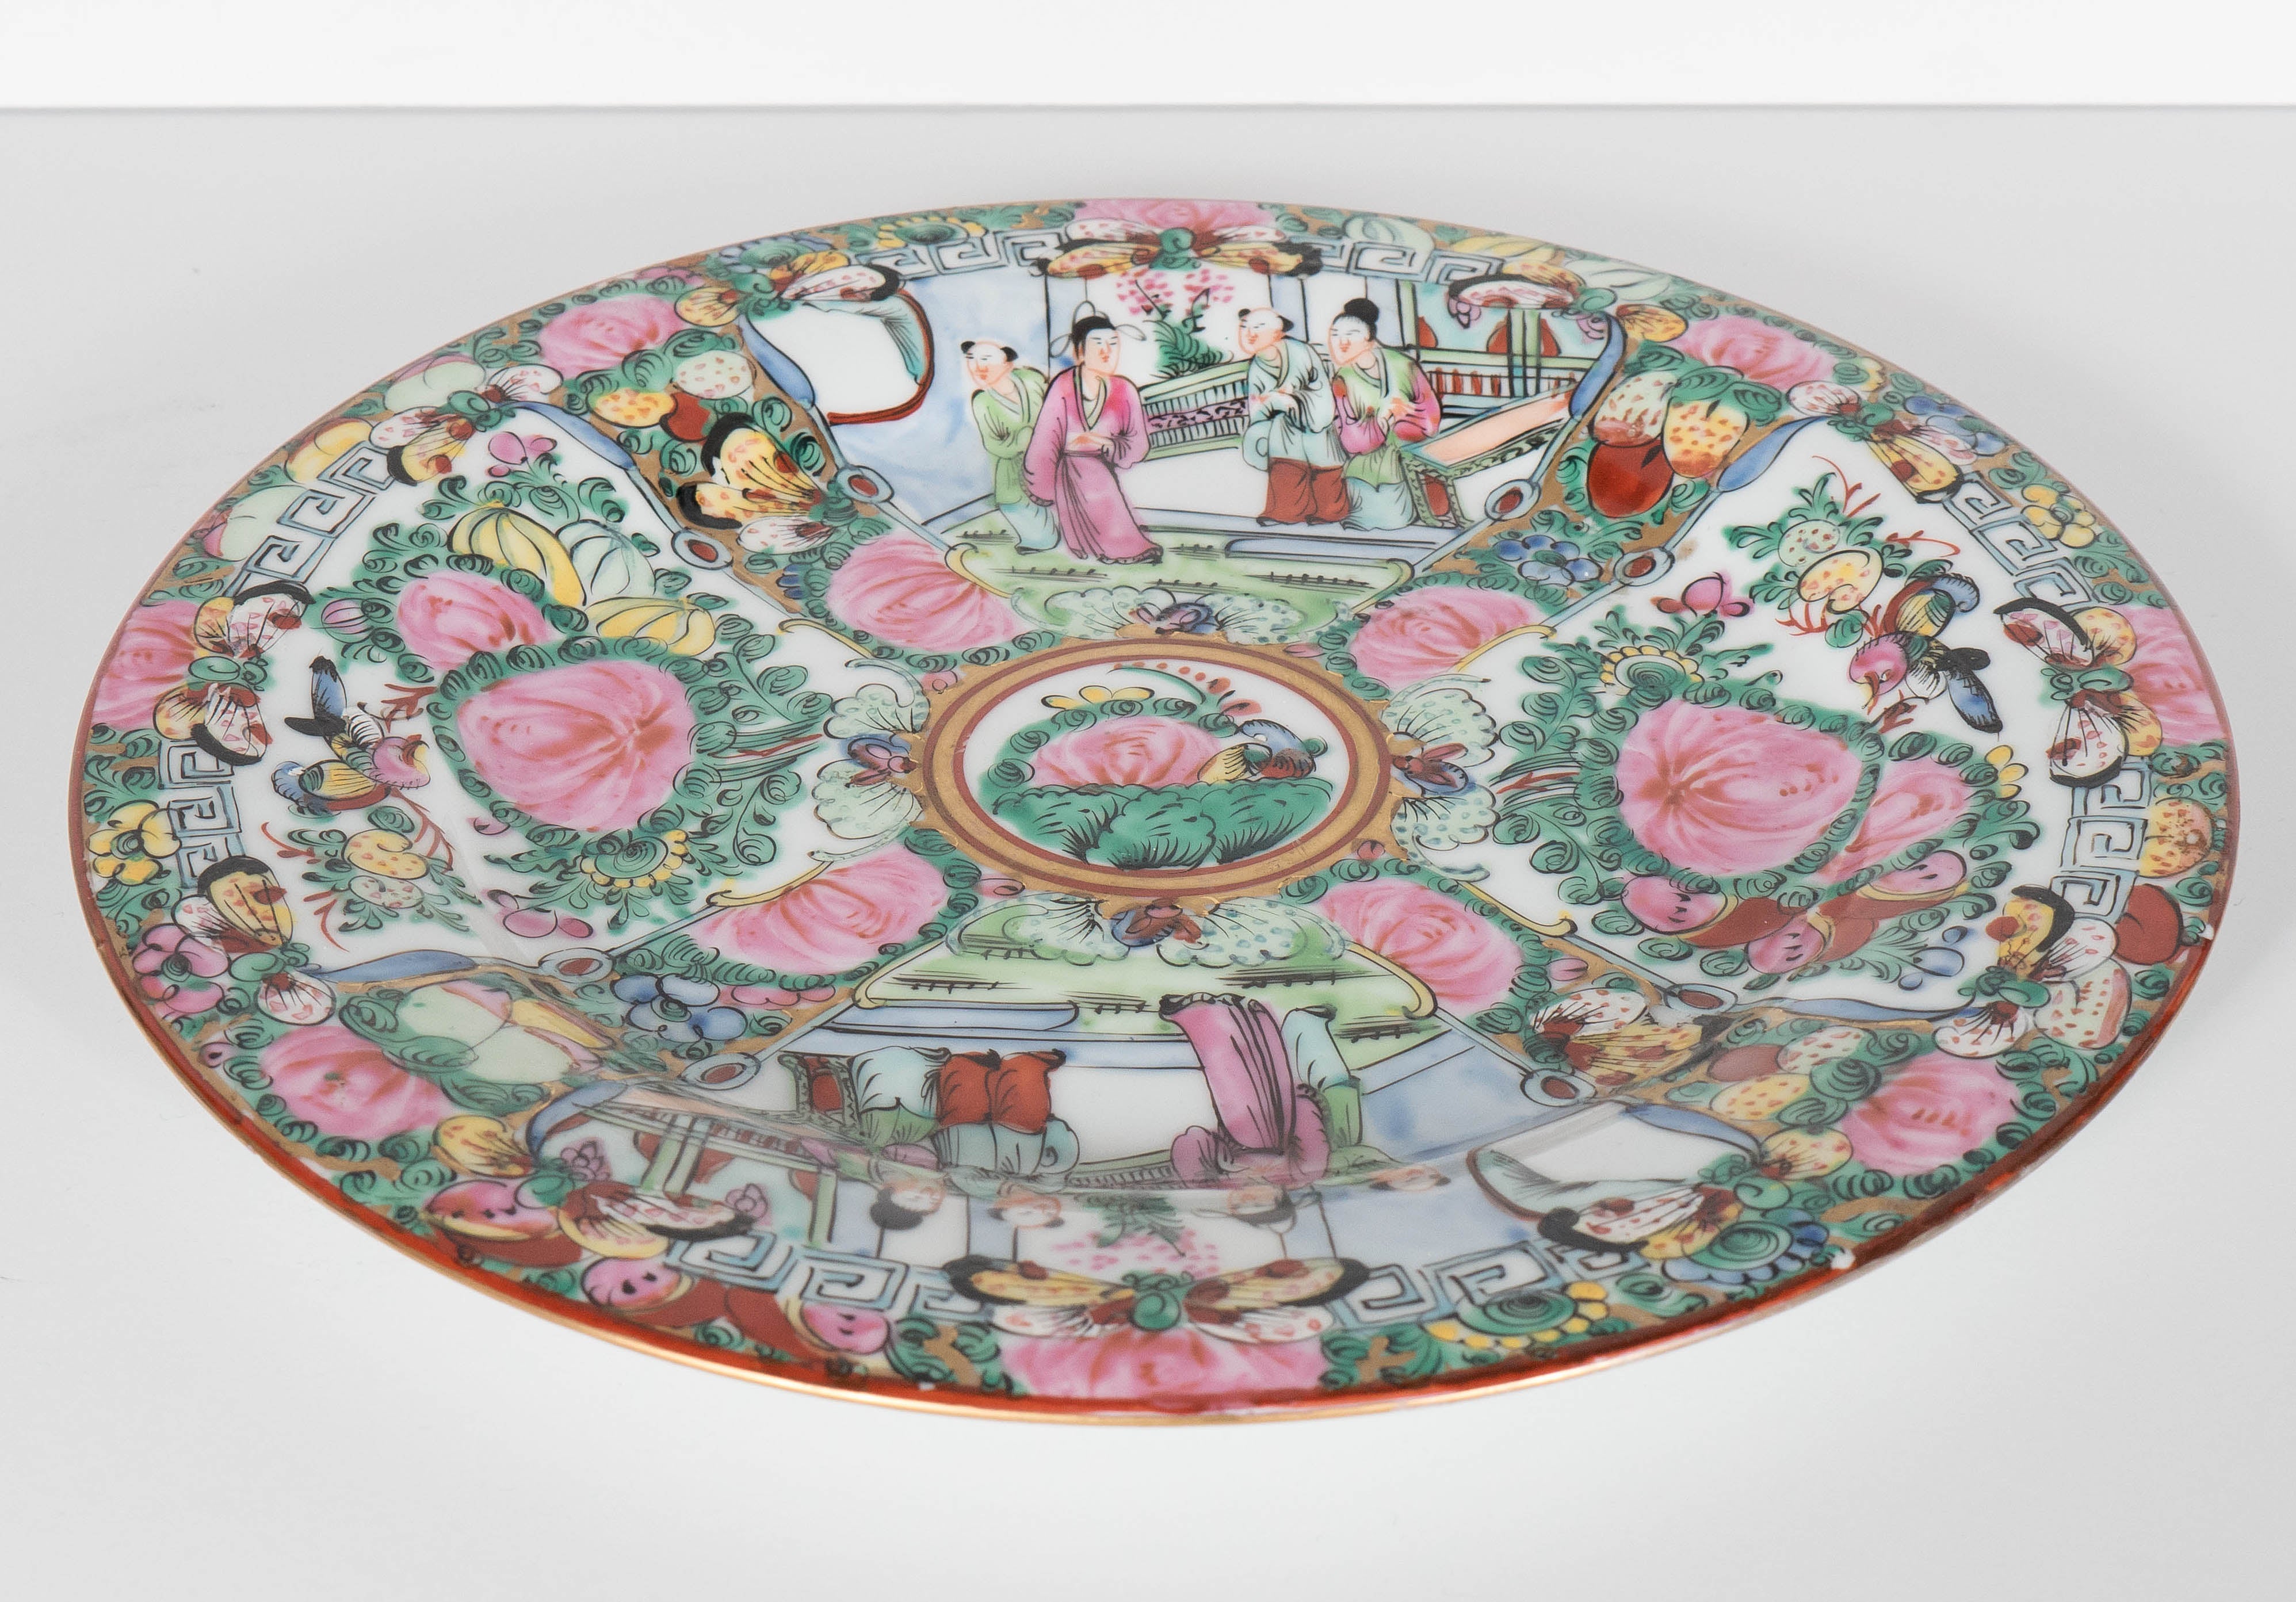  Chinese rose medallion or rose famile porcelain hot water plate. Two images of daily life and two images of birds and flowers adorn the plate with a gilt rim. Floral decoration on the outside of the footed plate on a white background. A gorgeous